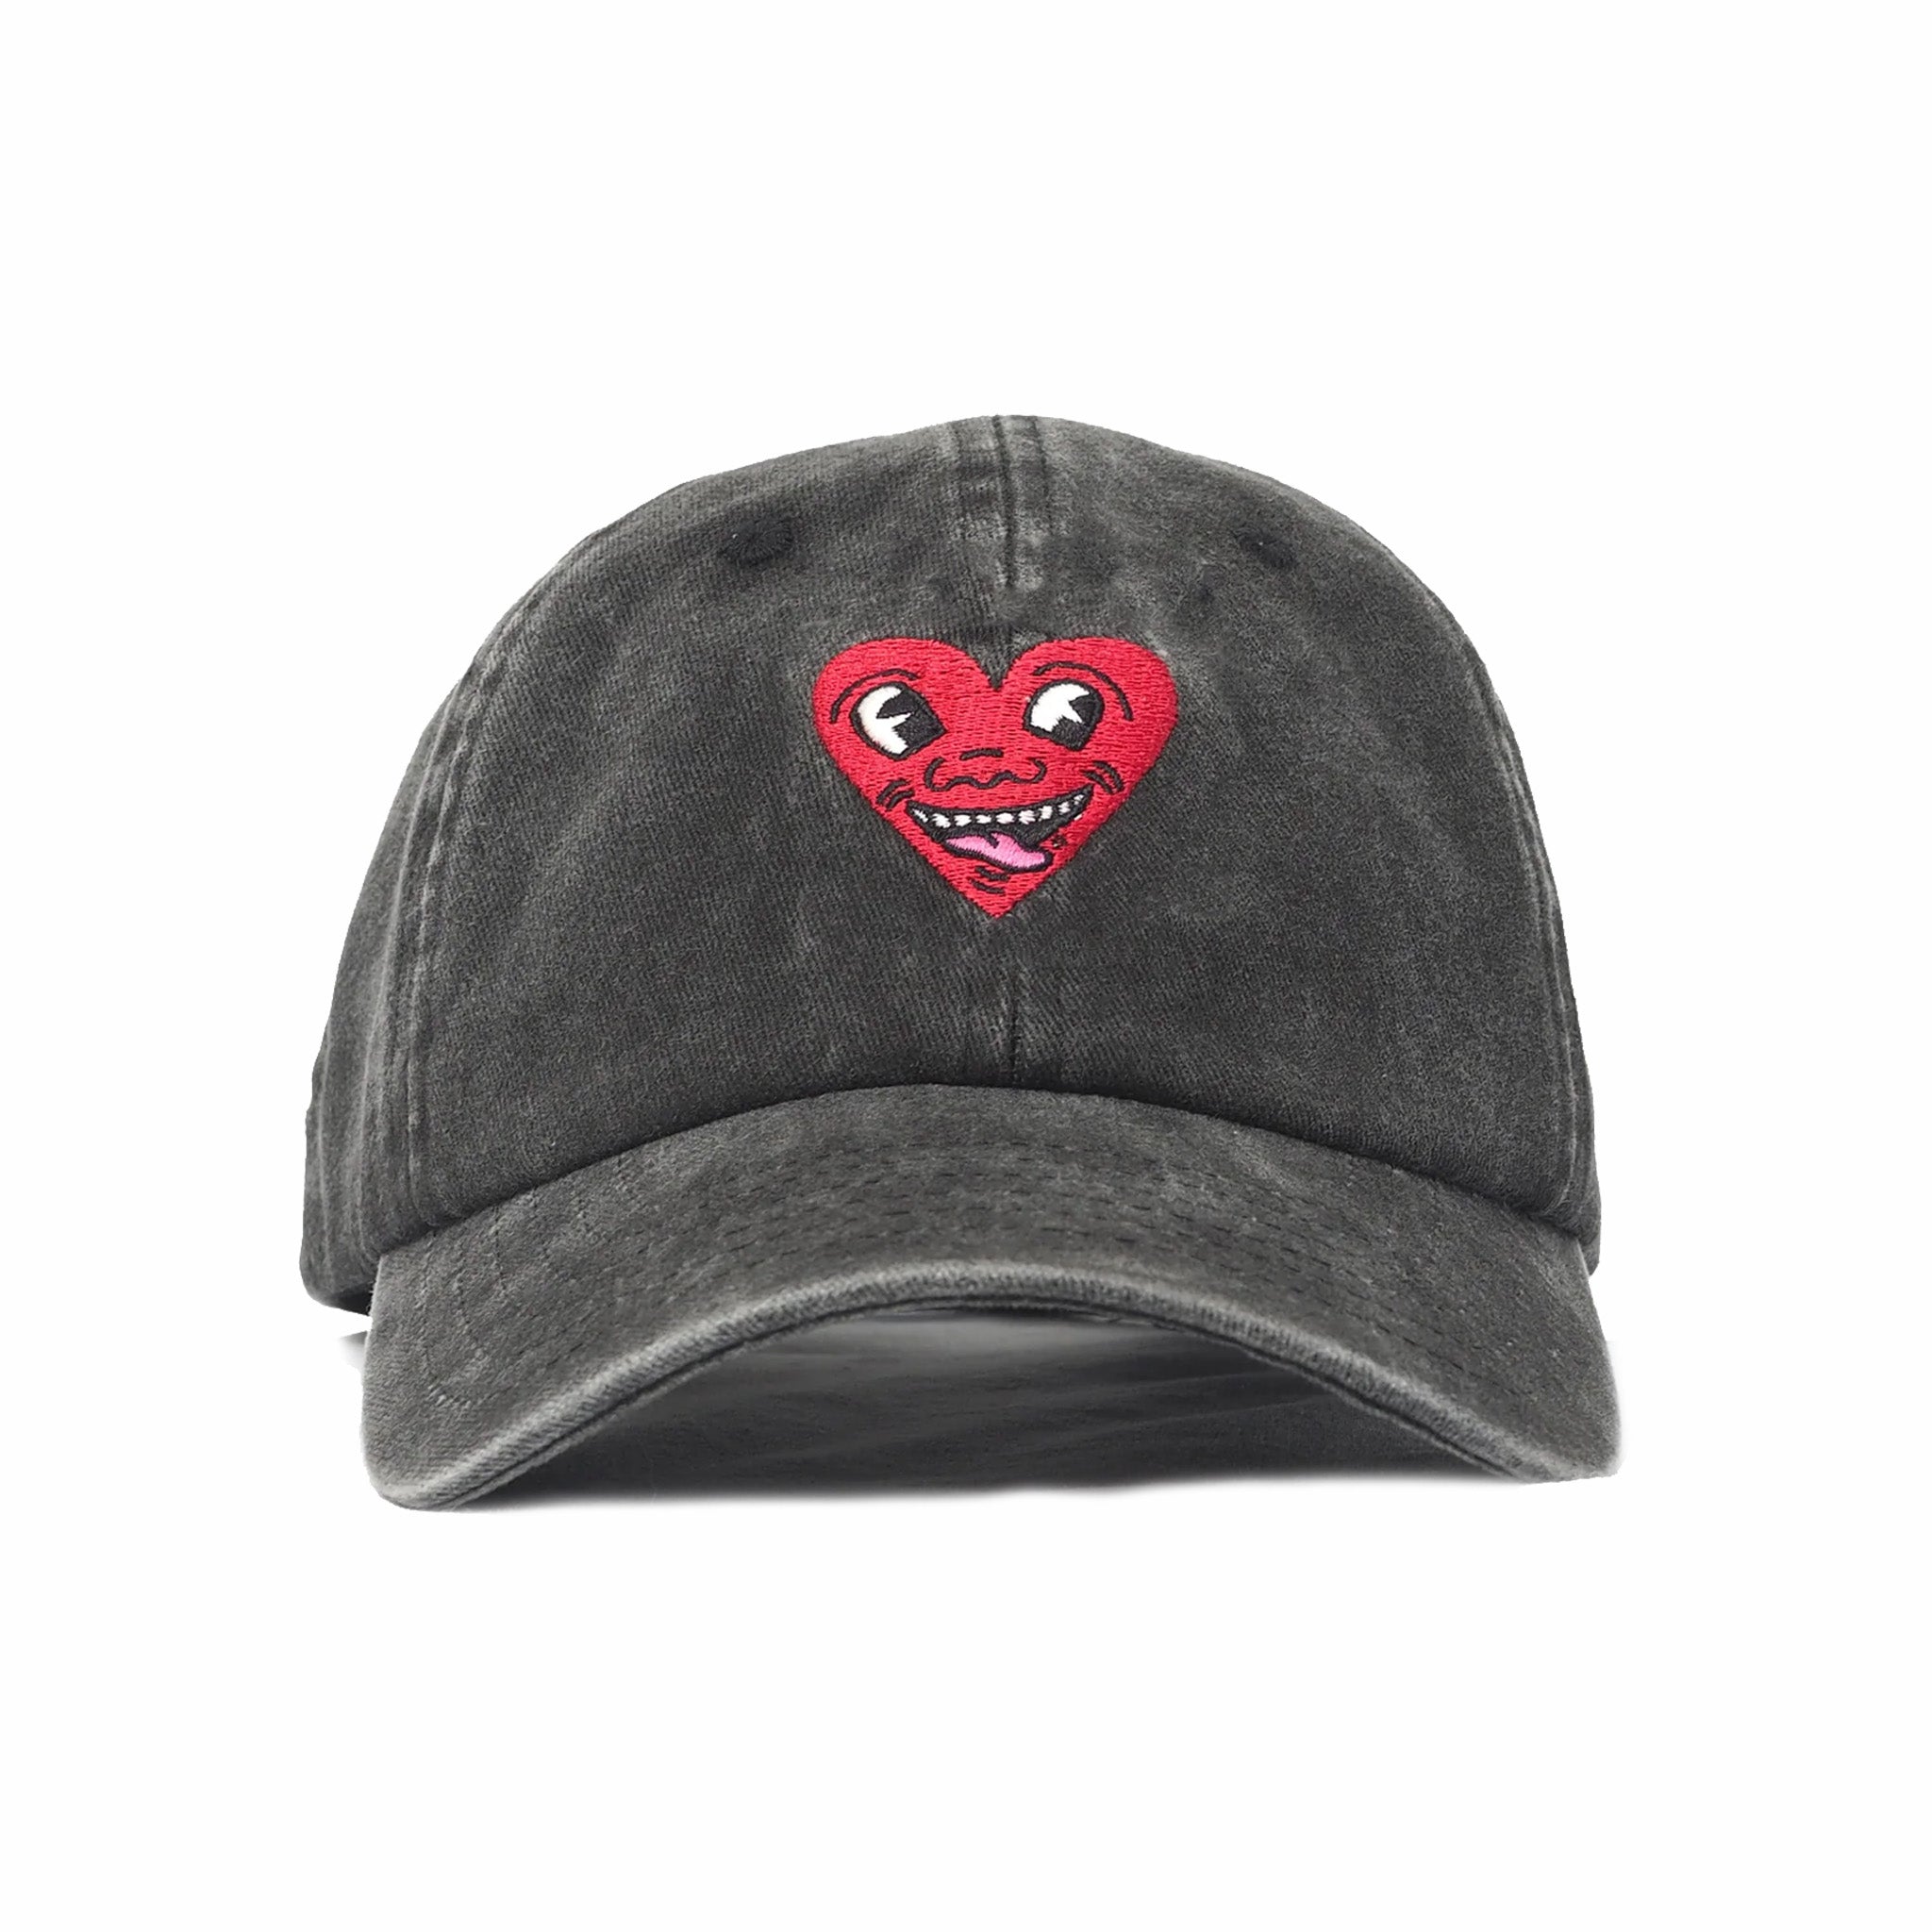 Jungles x Keith Haring Heart Face Cap (Washed Black) - August Shop